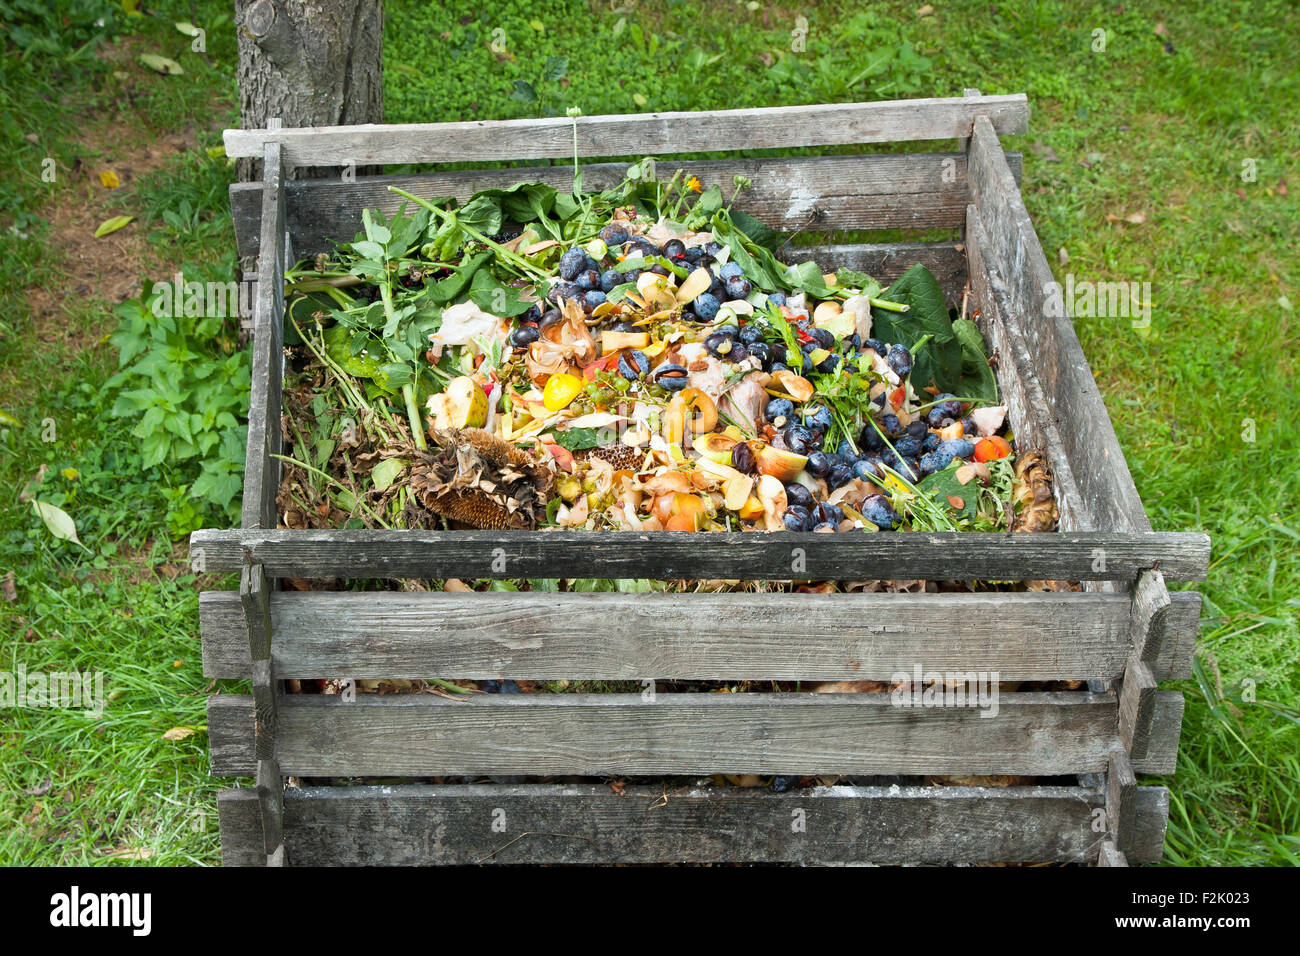 Compost bin in the garden. Composting pile of rotting kitchen fruits and vegetable scraps Stock Photo